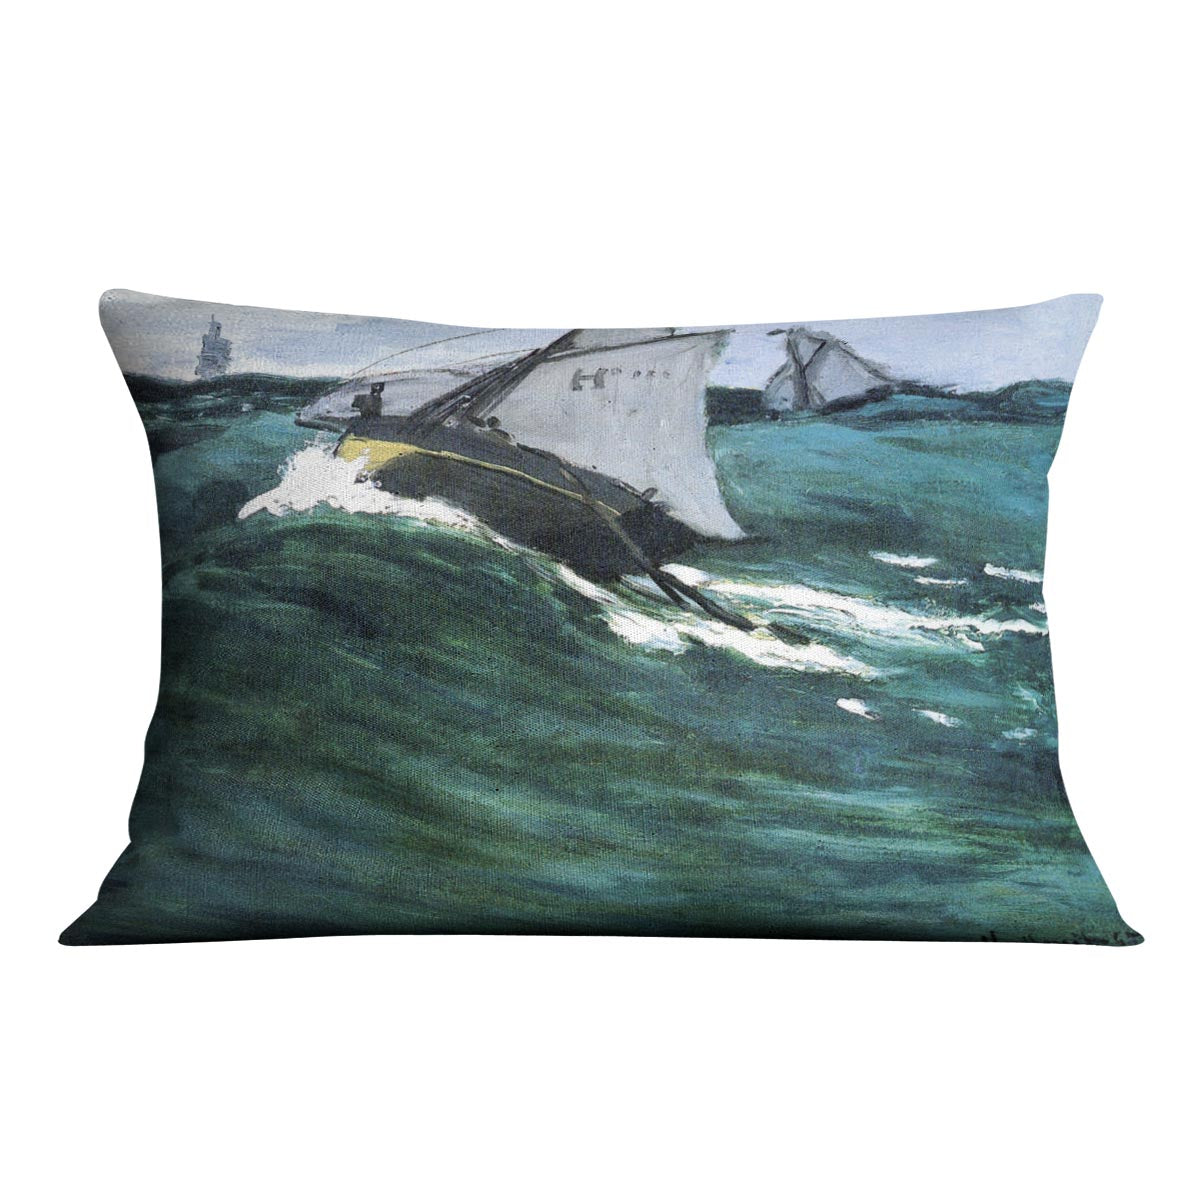 The green wave by Monet Cushion